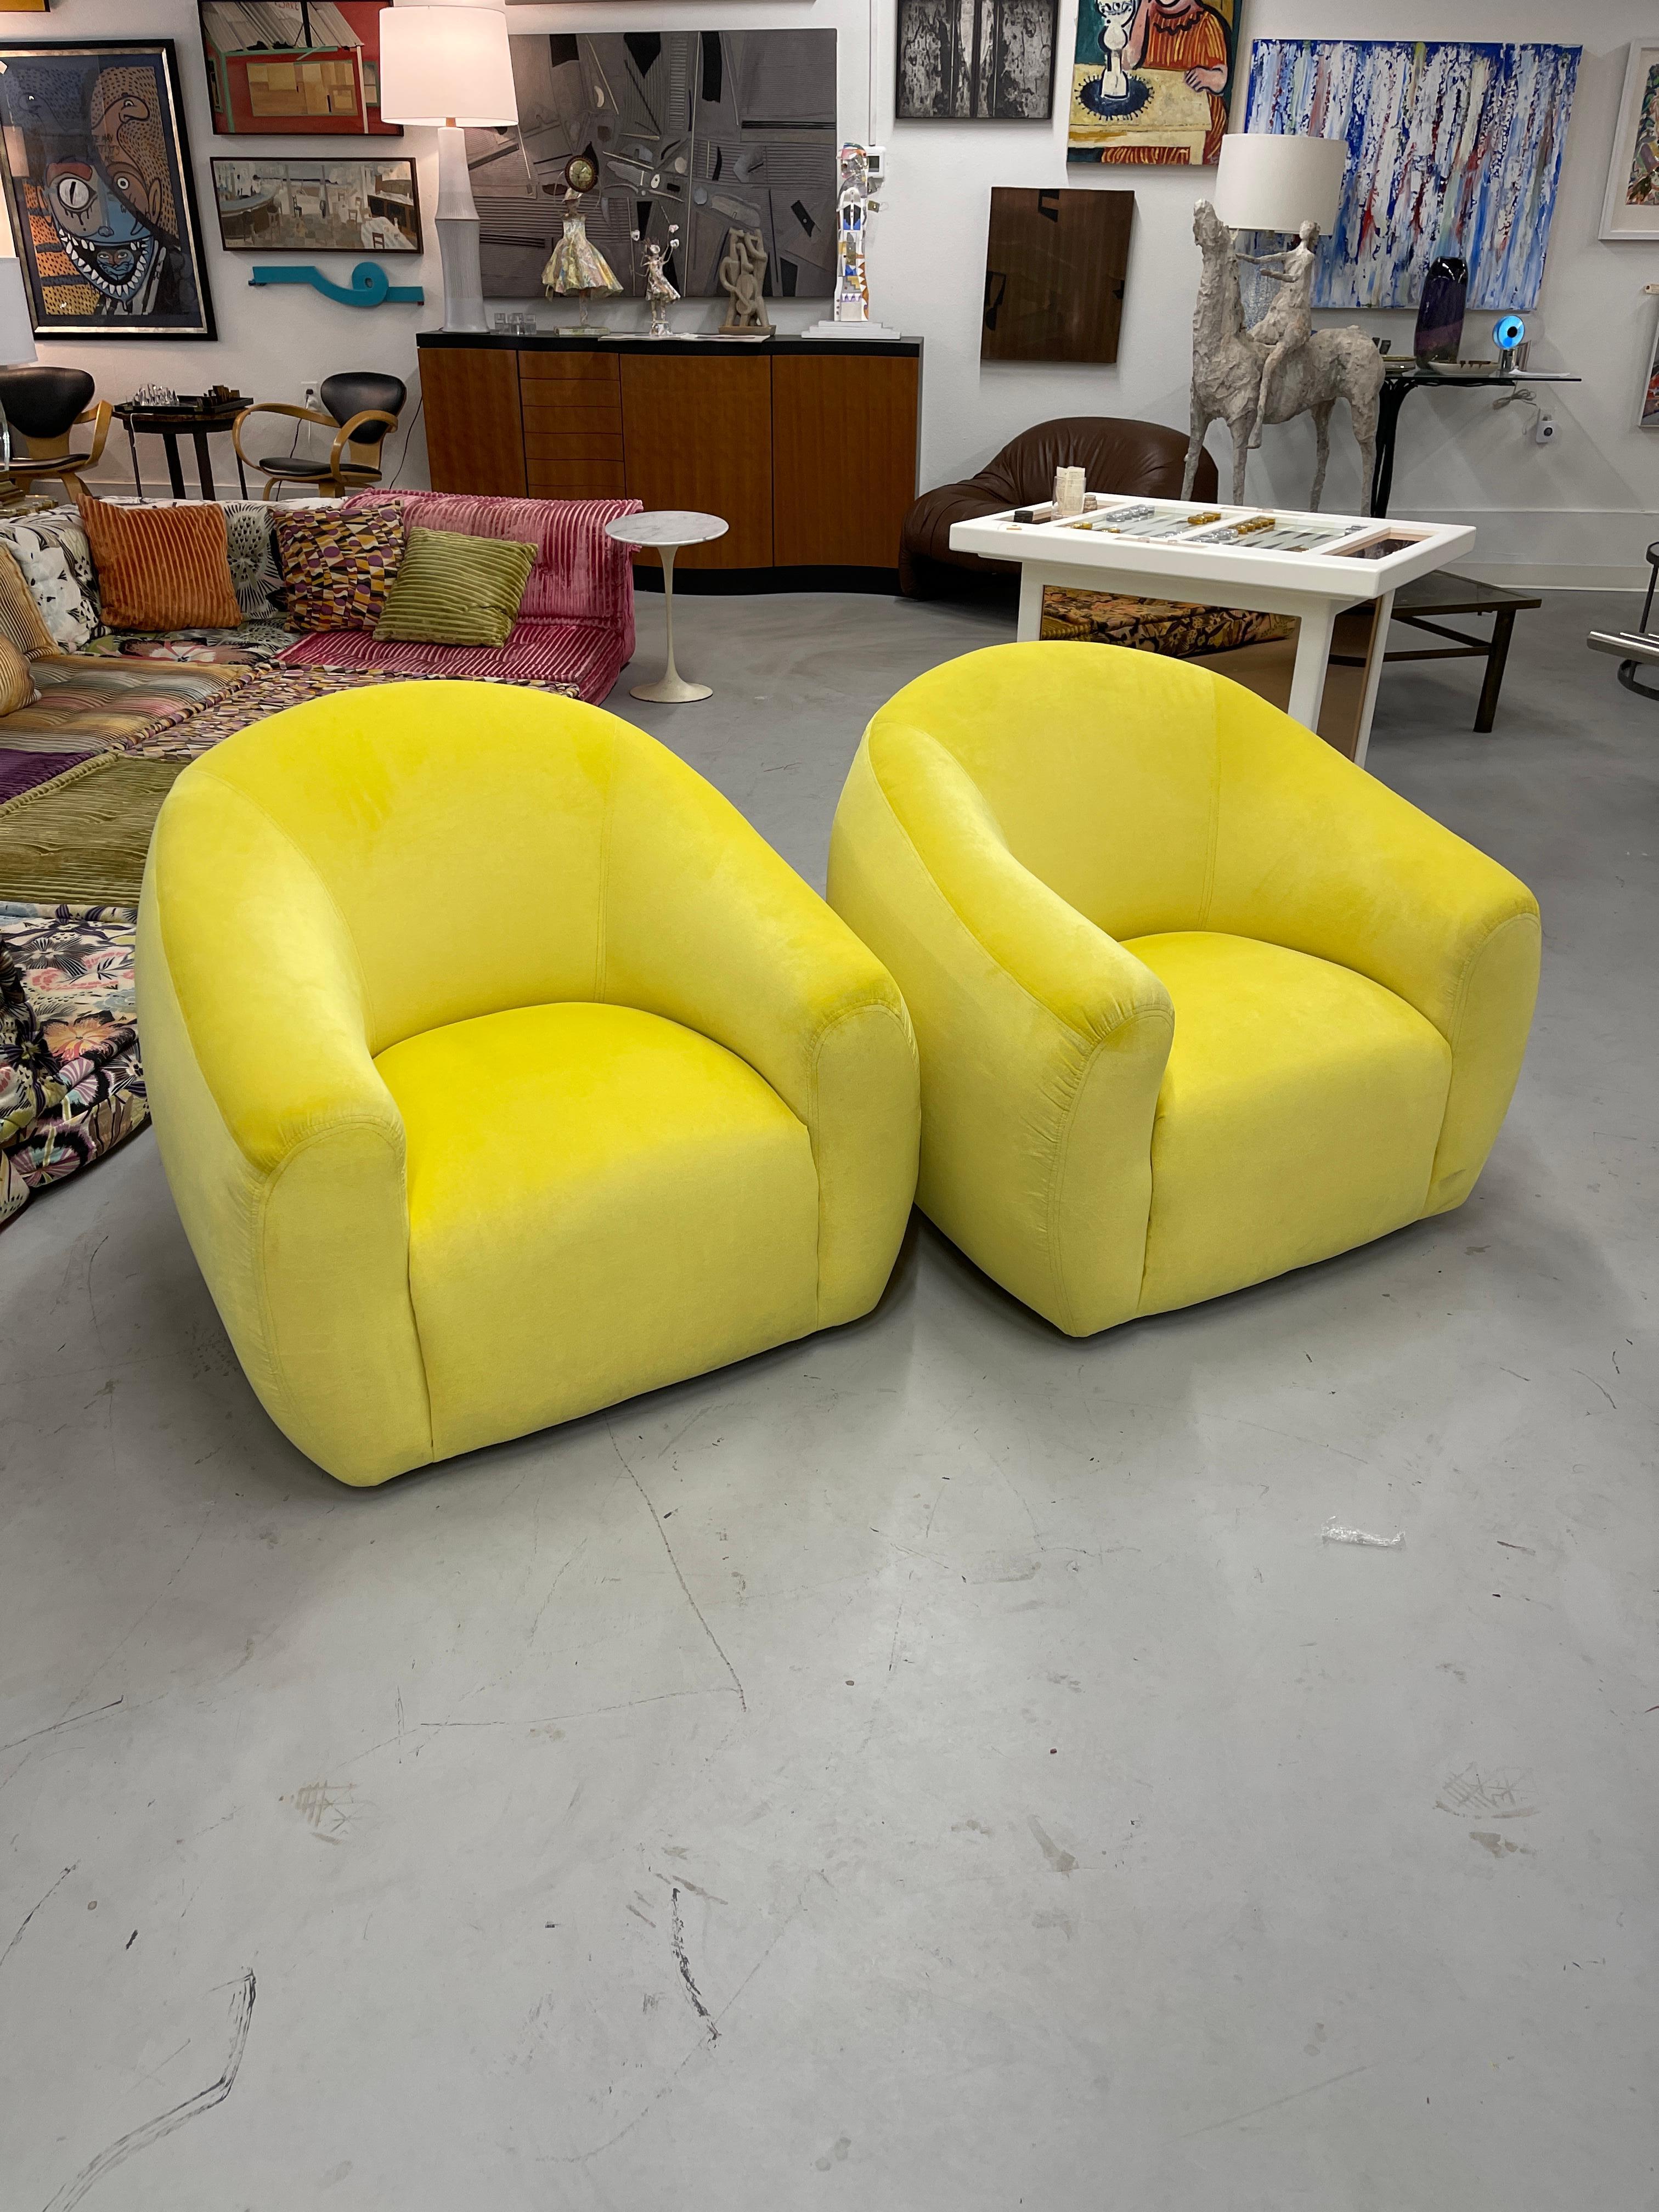 A stunning pair of vintage A. Rudin swivel chairs totally reimagined and reupholstered in a vibrant Kravet Rioma Limon color. The chairs have been reshaped by our upholsterer into a generous and extremely comfortable pair of chairs. Great detail